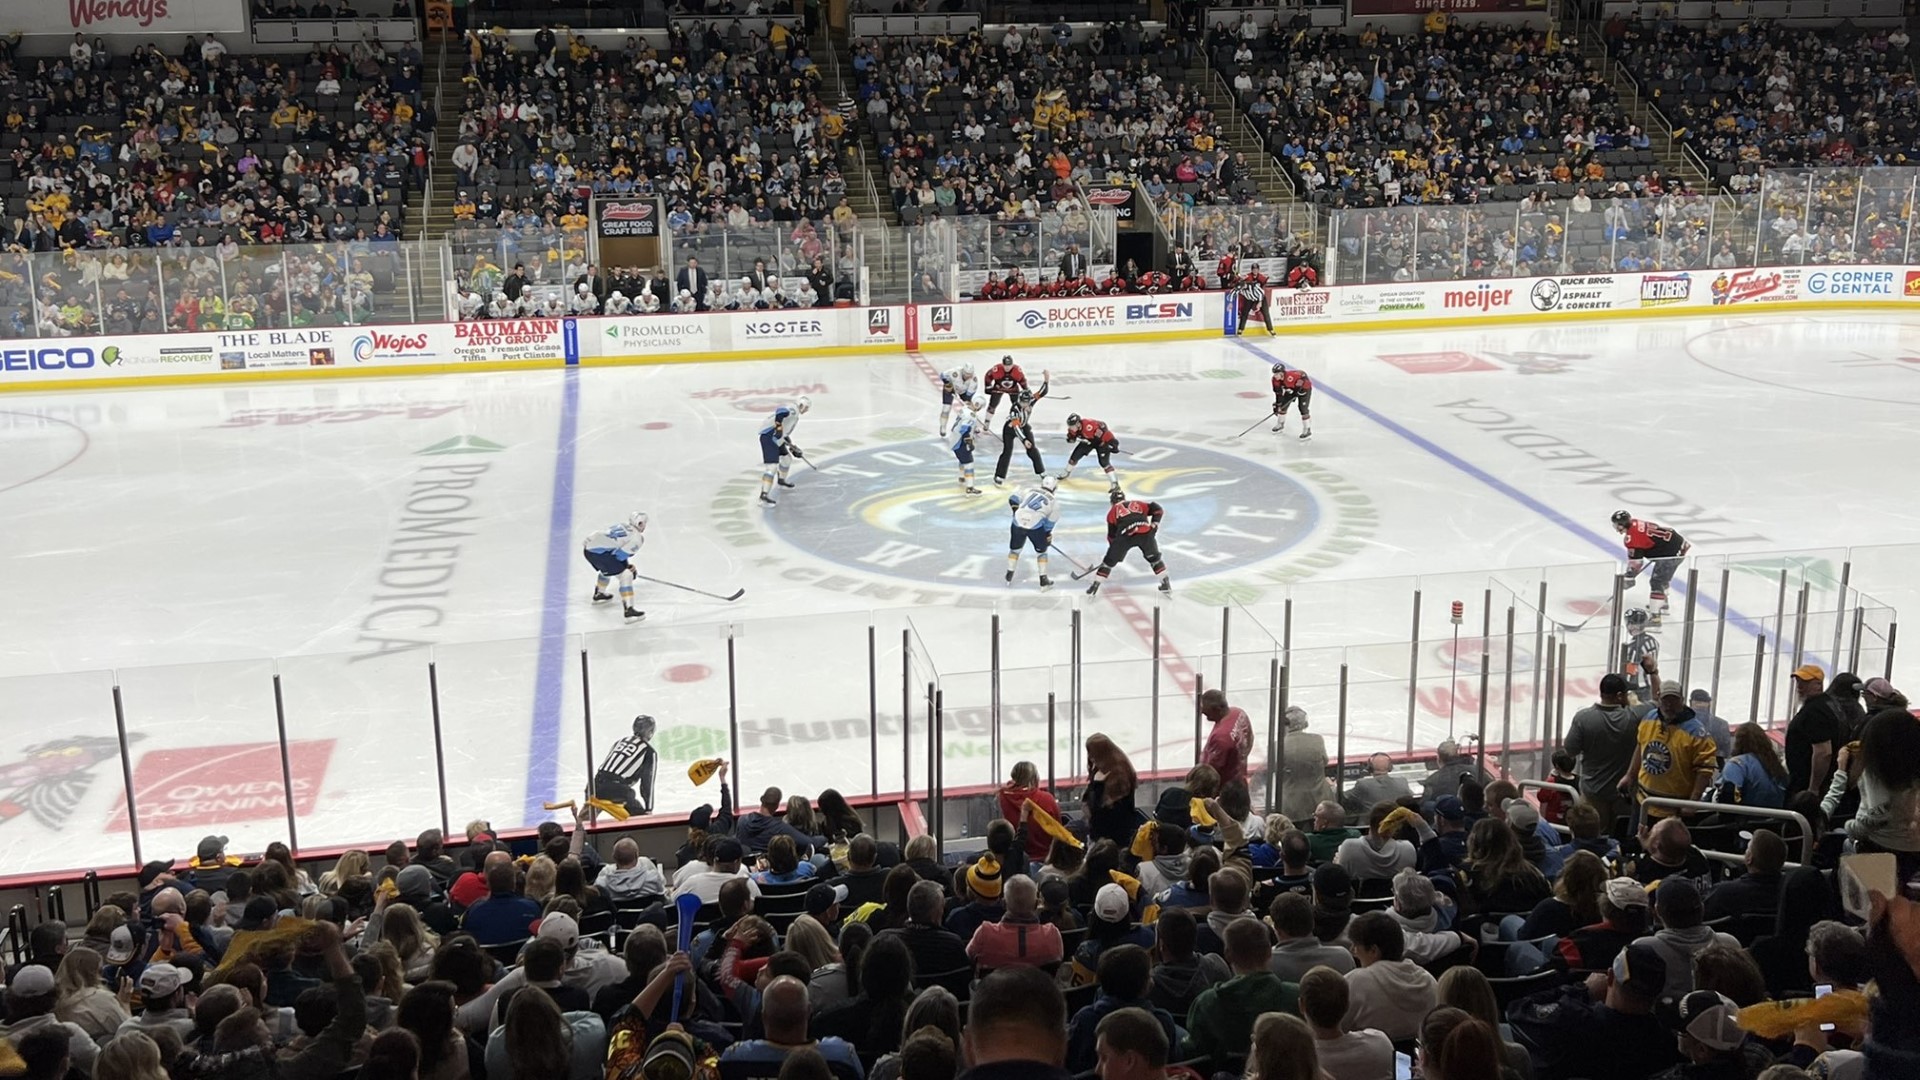 The Walleye beat Cincinnati 3-0 in front of a record 8,592 fans, forcing a Game 7 on Tuesday in Toledo.